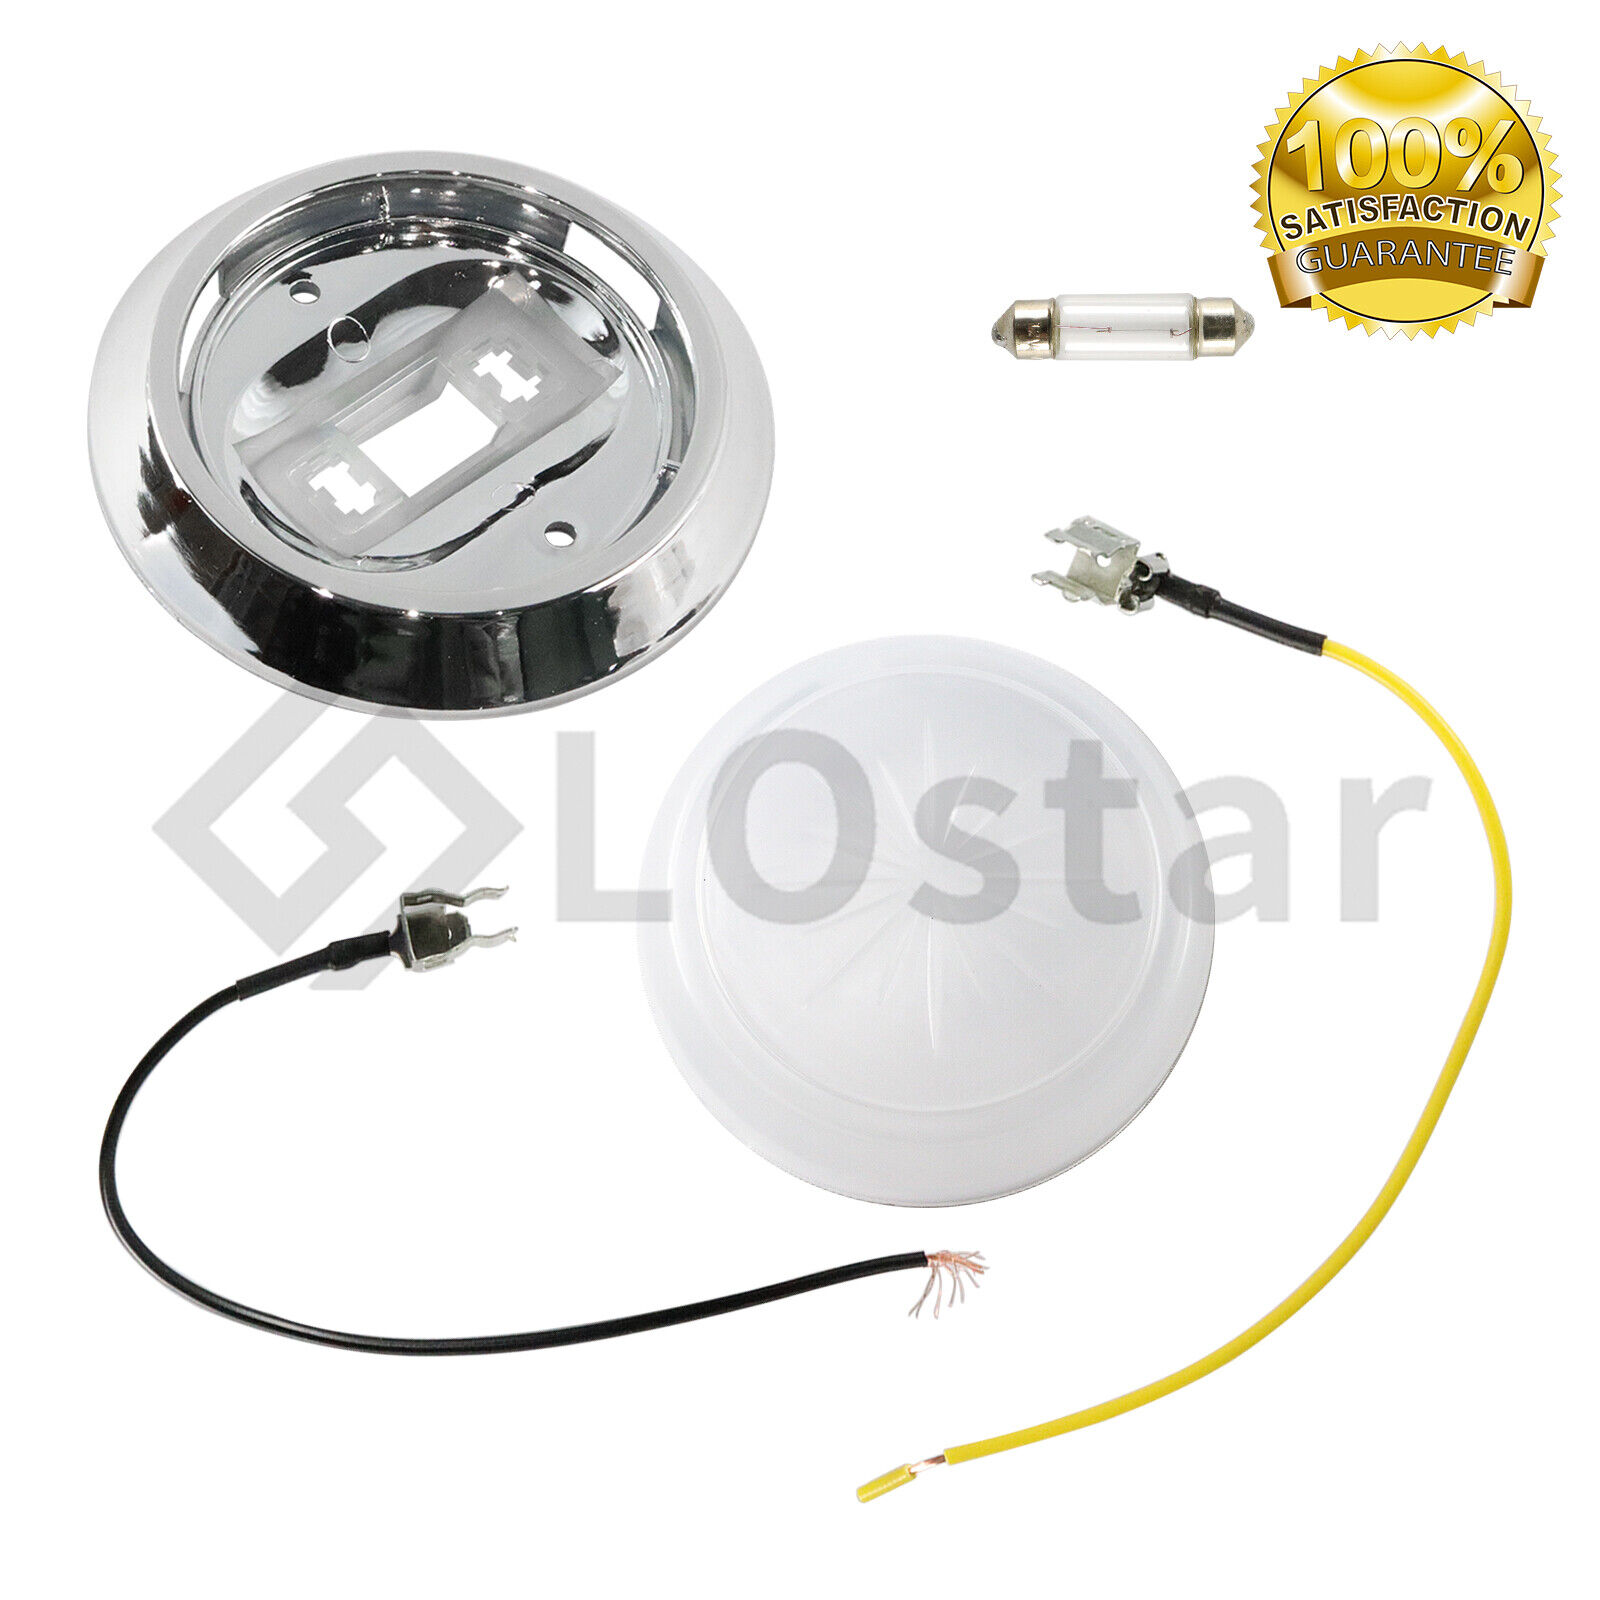 Round Dome Light Base & Lens w/ Bulb & Wire leads for Most 71-81 Chevrolet Cars